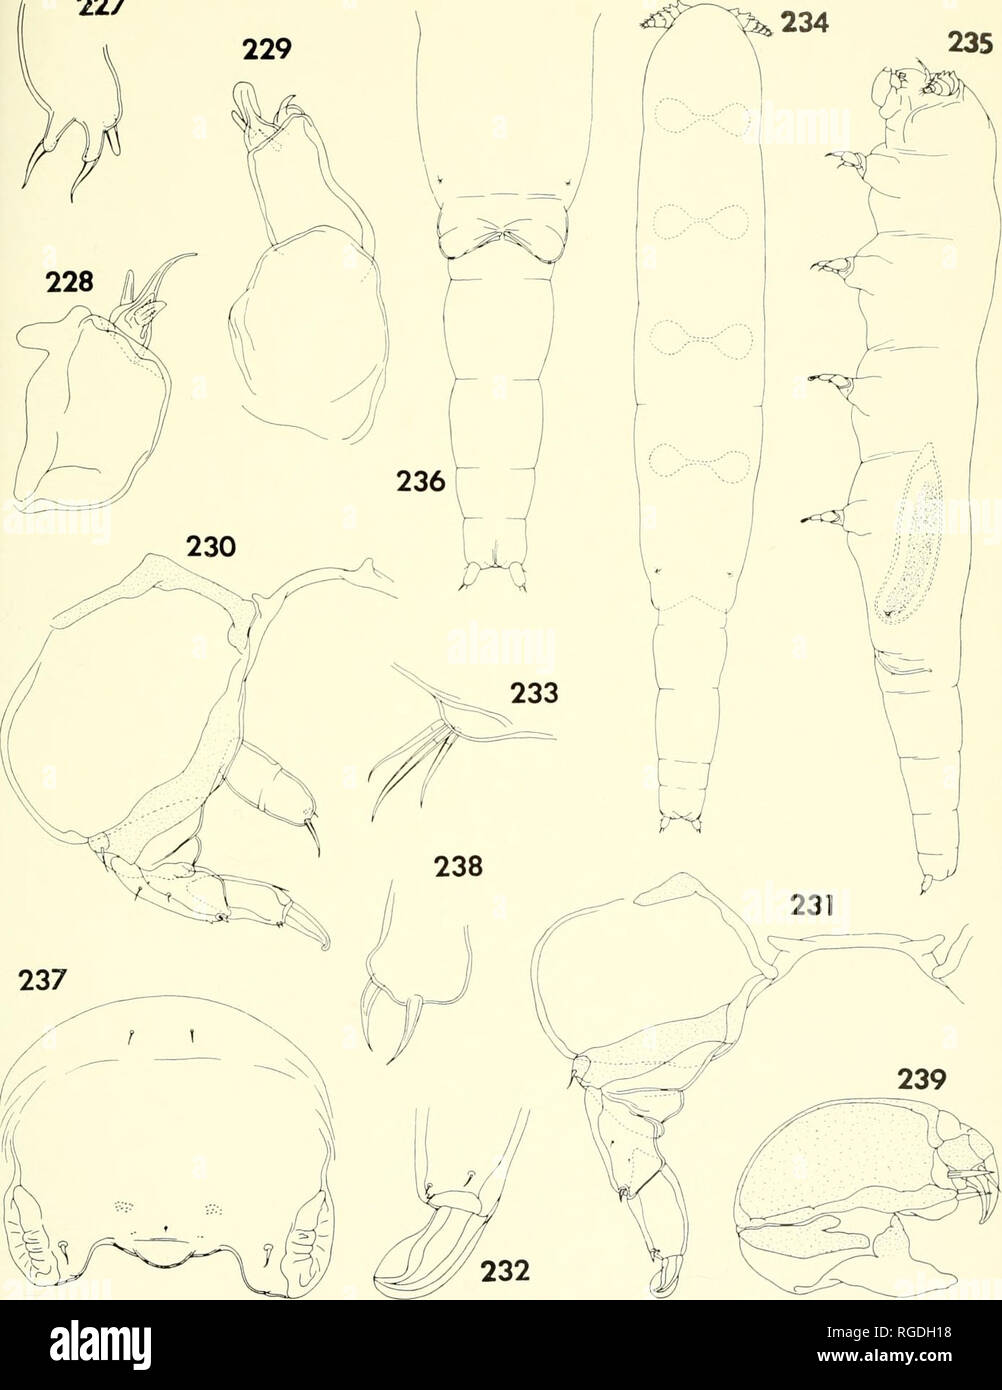 . Bulletin of the Museum of Comparative Zoology at Harvard College. Zoology. Parasitic Copepods from Corals ix Madagasc;ar • Humes and Ho 459 227. Figures 227-233. Orstomella lobophylliae n. gen., n. sp., female (continued). 227, first maxilla, ventrointernol (E); 228, second maxilla, ventrointernol (E); 229, maxilliped, outer (D); 230, leg 1 ond intercoxal plate, posierlor (C); 231, leg 3 and interco.xol plate, posterior (C); 232, terminal portion of exopod of leg 4, lateral (E); 233, leg 5, ventral (E). Figures 234-239. Or:fome//o lobophylliae n. gen., n. sp., male. 234, body, dorsal (I); 23 Stock Photo